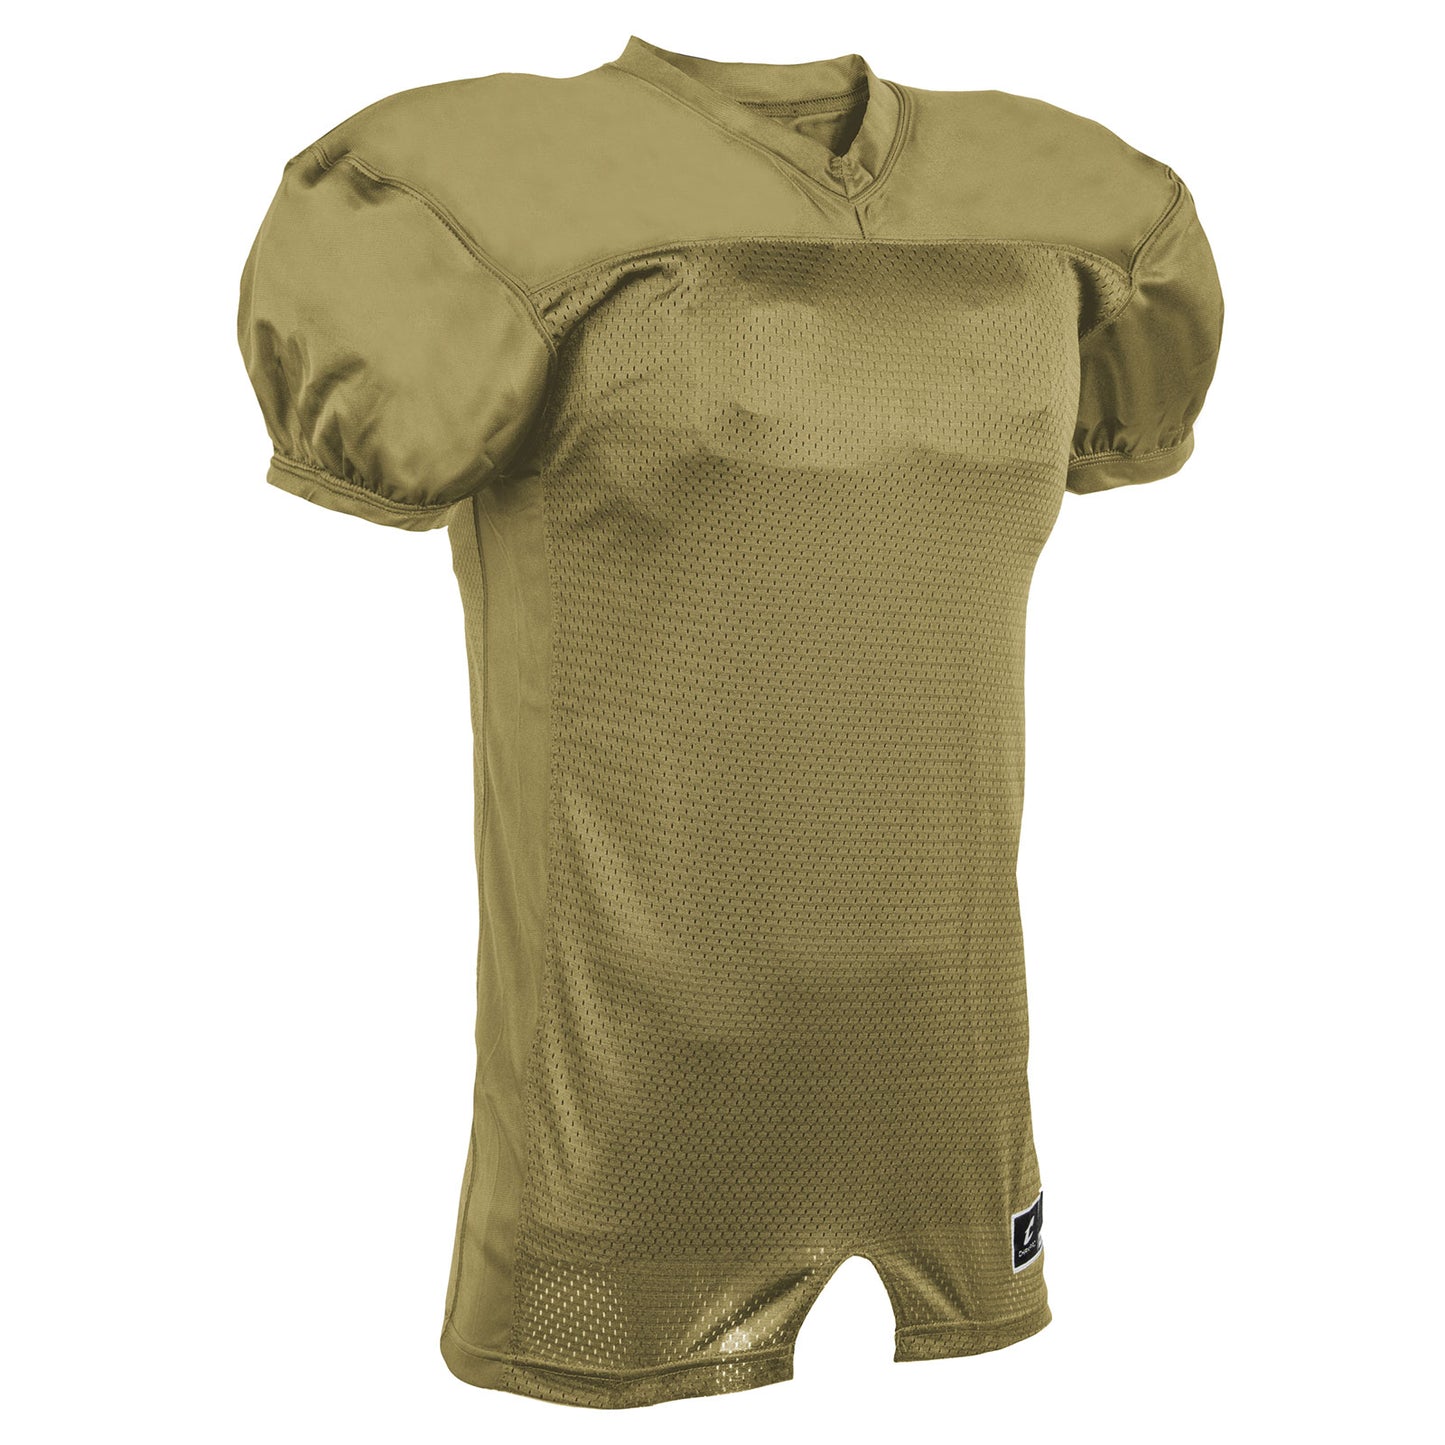 Pro Game Stretch Mesh Solid Football Jersey VEGAS GOLD BODY